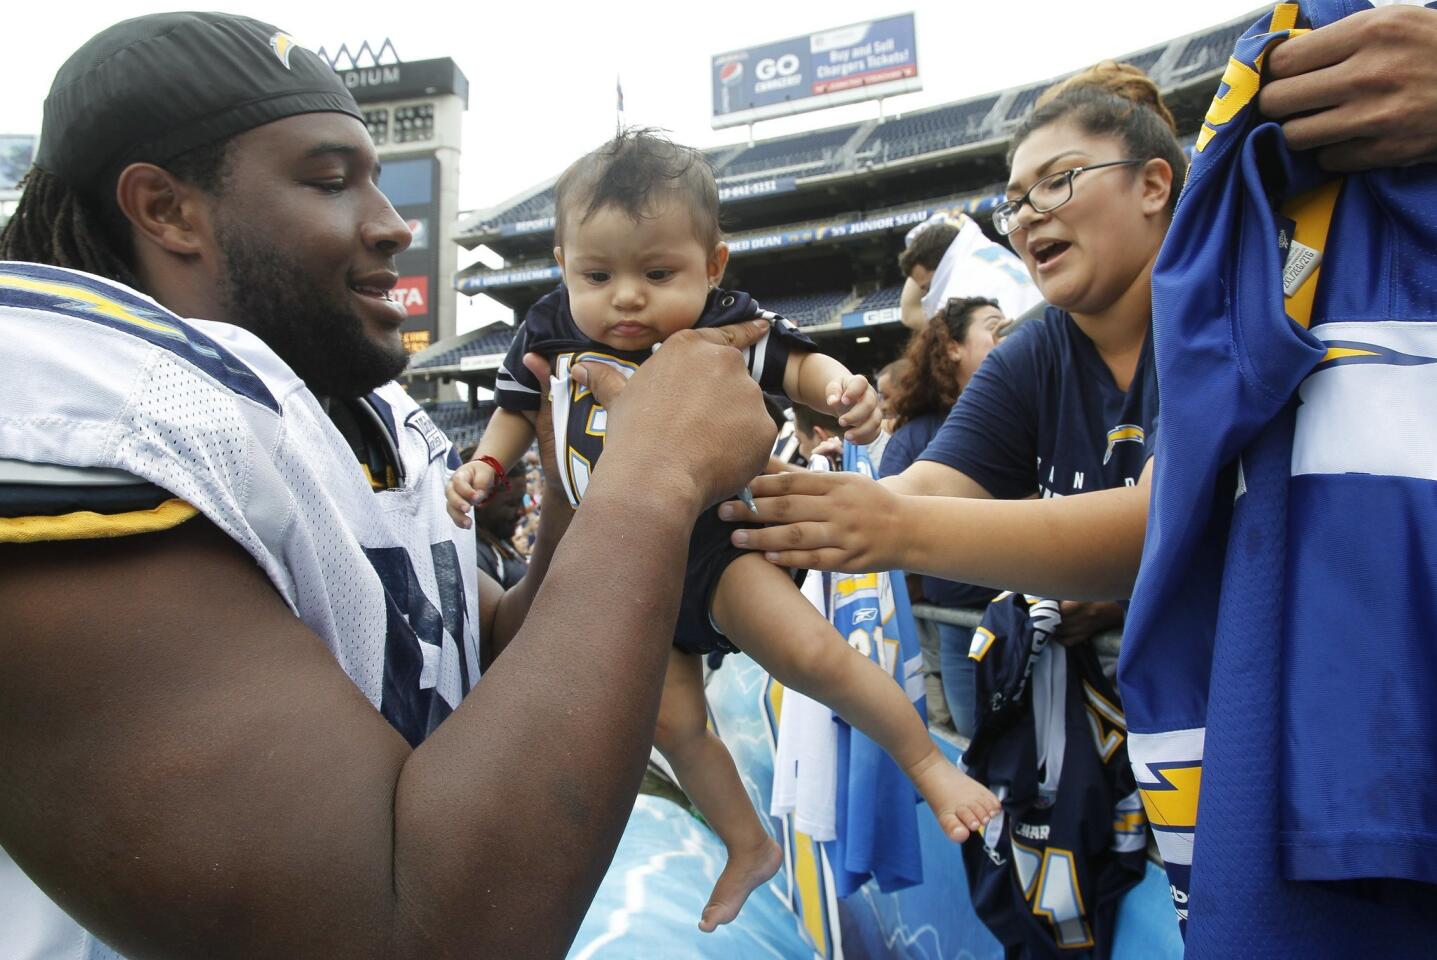 Chargers fan Cindy Huertas hands her 6-month-old son Marilyn Shay Dominguez to the Chargers' D.J. Johnson so that he could sign the baby's jersey during FanFest 2014 at Qualcomm Stadium on Saturday, August 2, 2014.